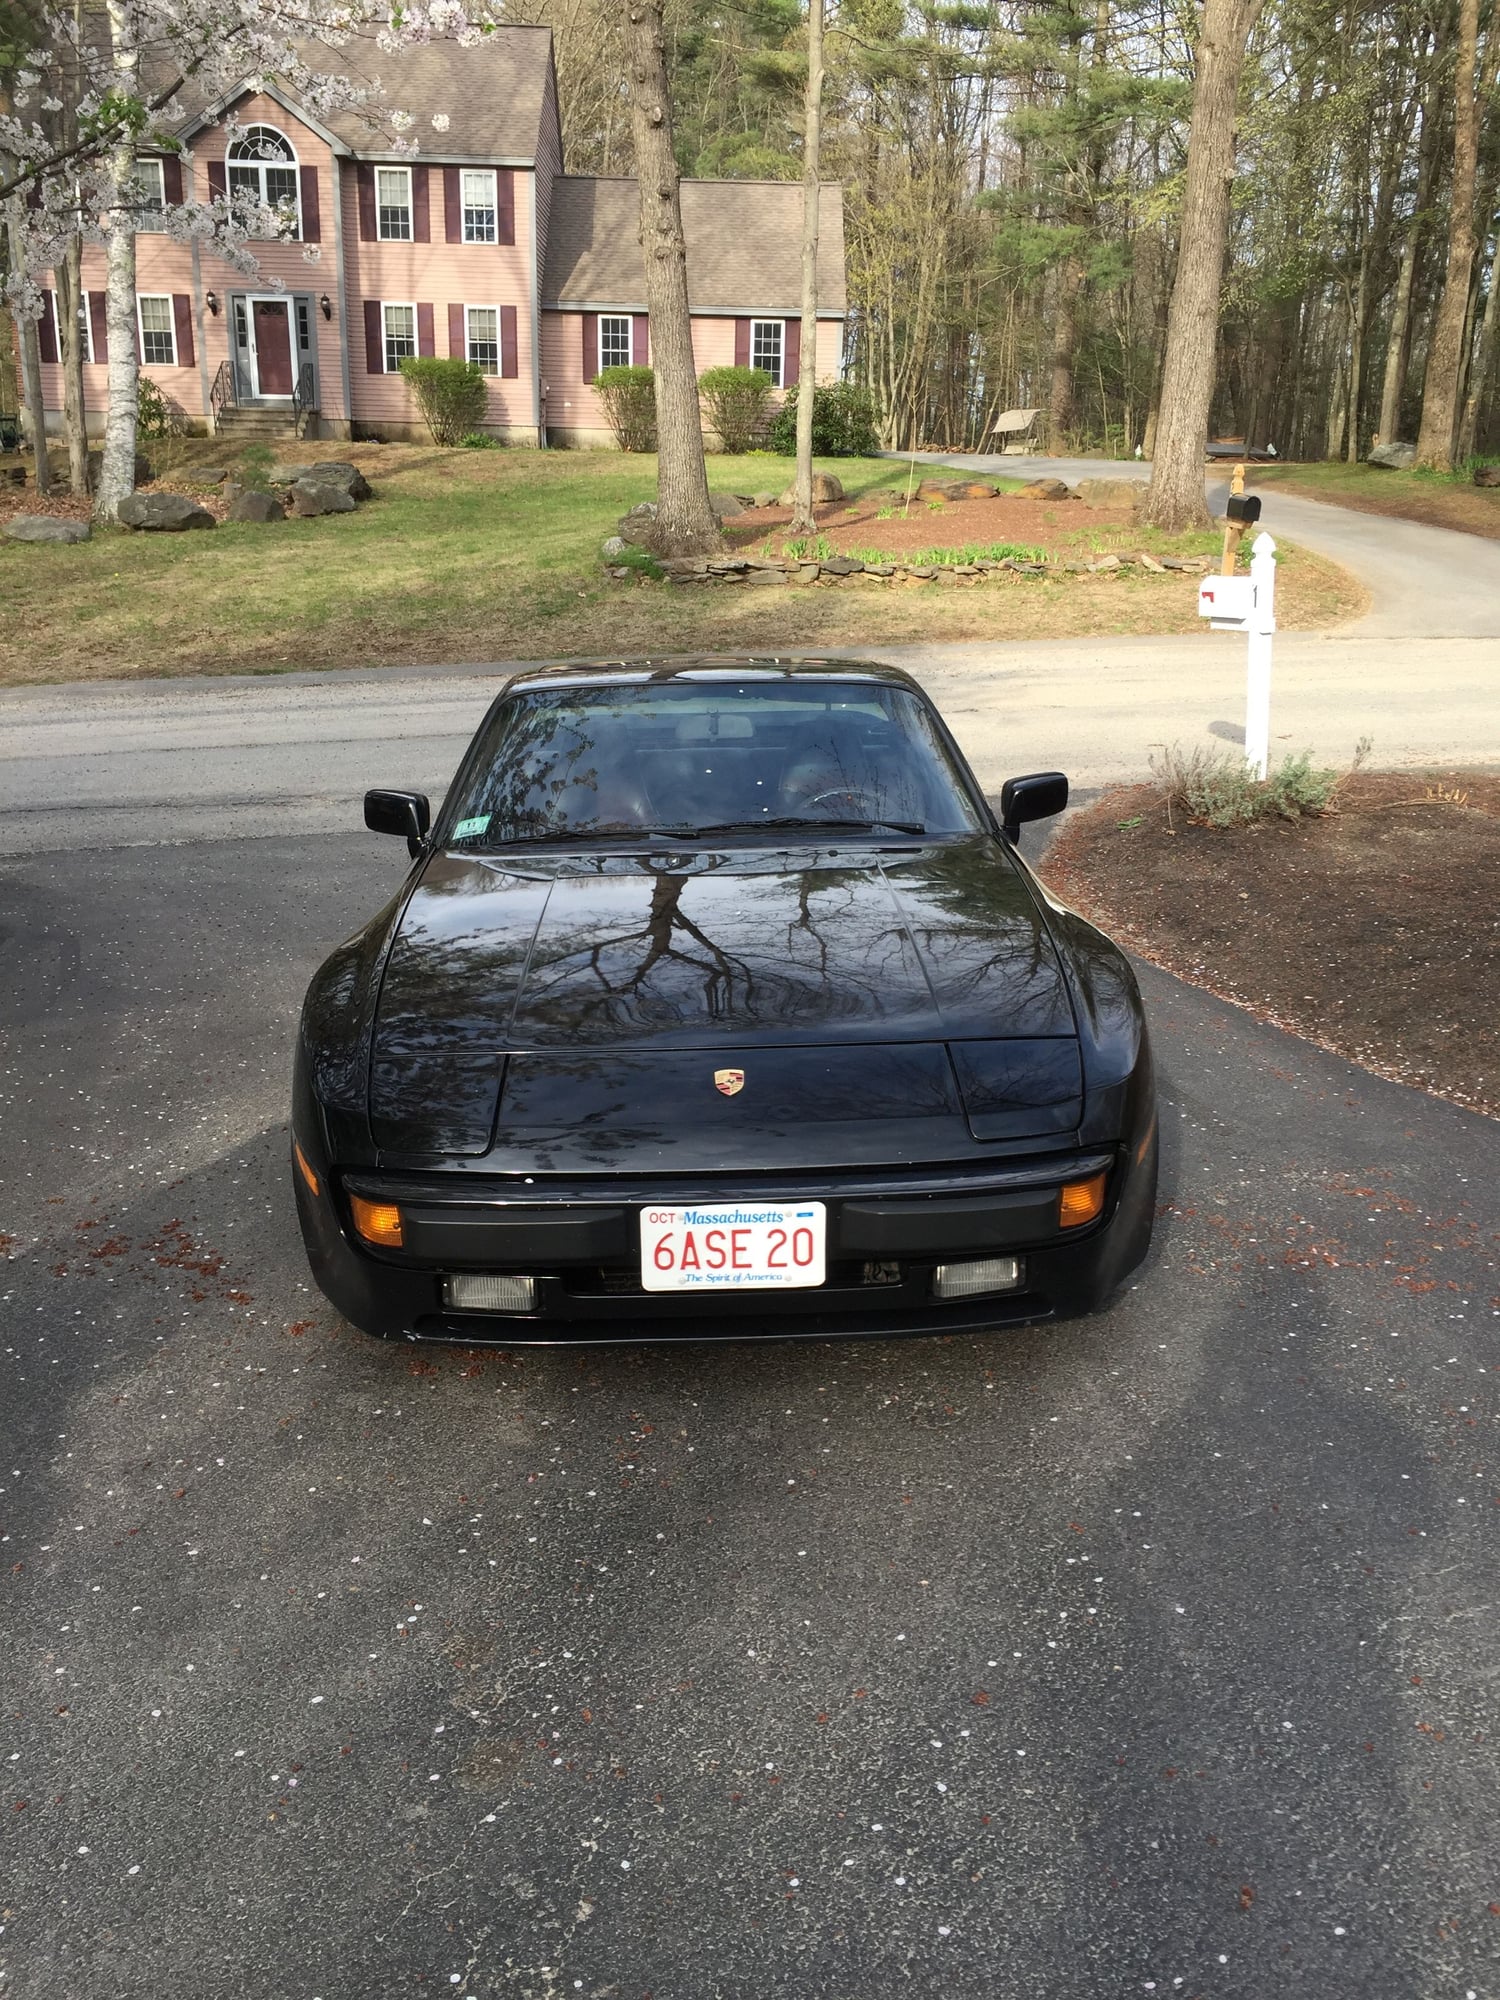 1985 Porsche 944 - 1985.5 Porsche 944 $5,500 OBO - Used - VIN WP0AA0943FN454018 - 115,000 Miles - 4 cyl - 2WD - Manual - Hatchback - Black - Sterling, MA 01564, United States